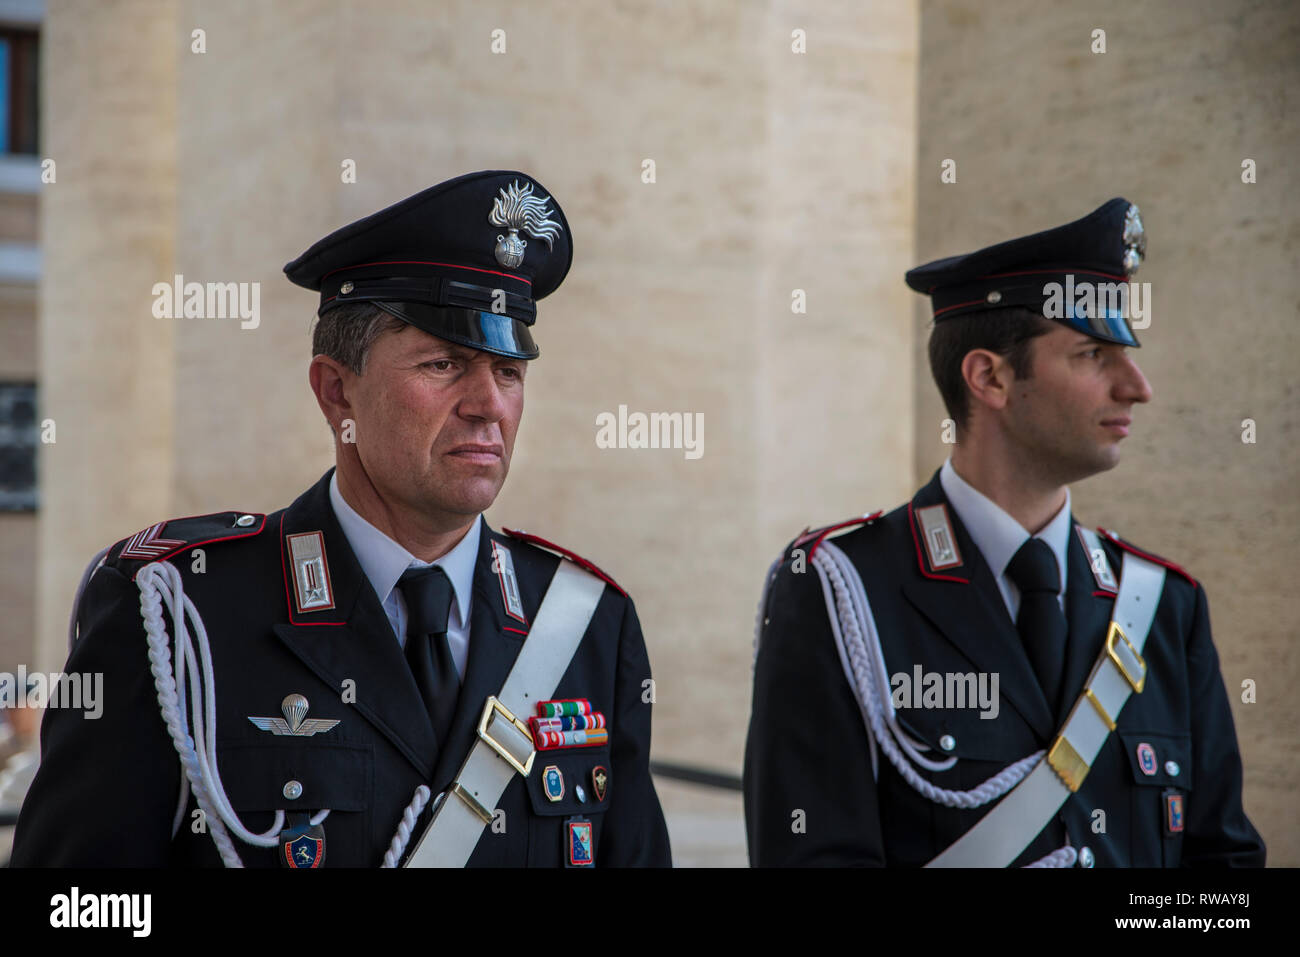 Rome - June 18, 2014 : Two italian police officer is standing on the street. The Carabinieri stand on the streets of Rome. Stock Photo